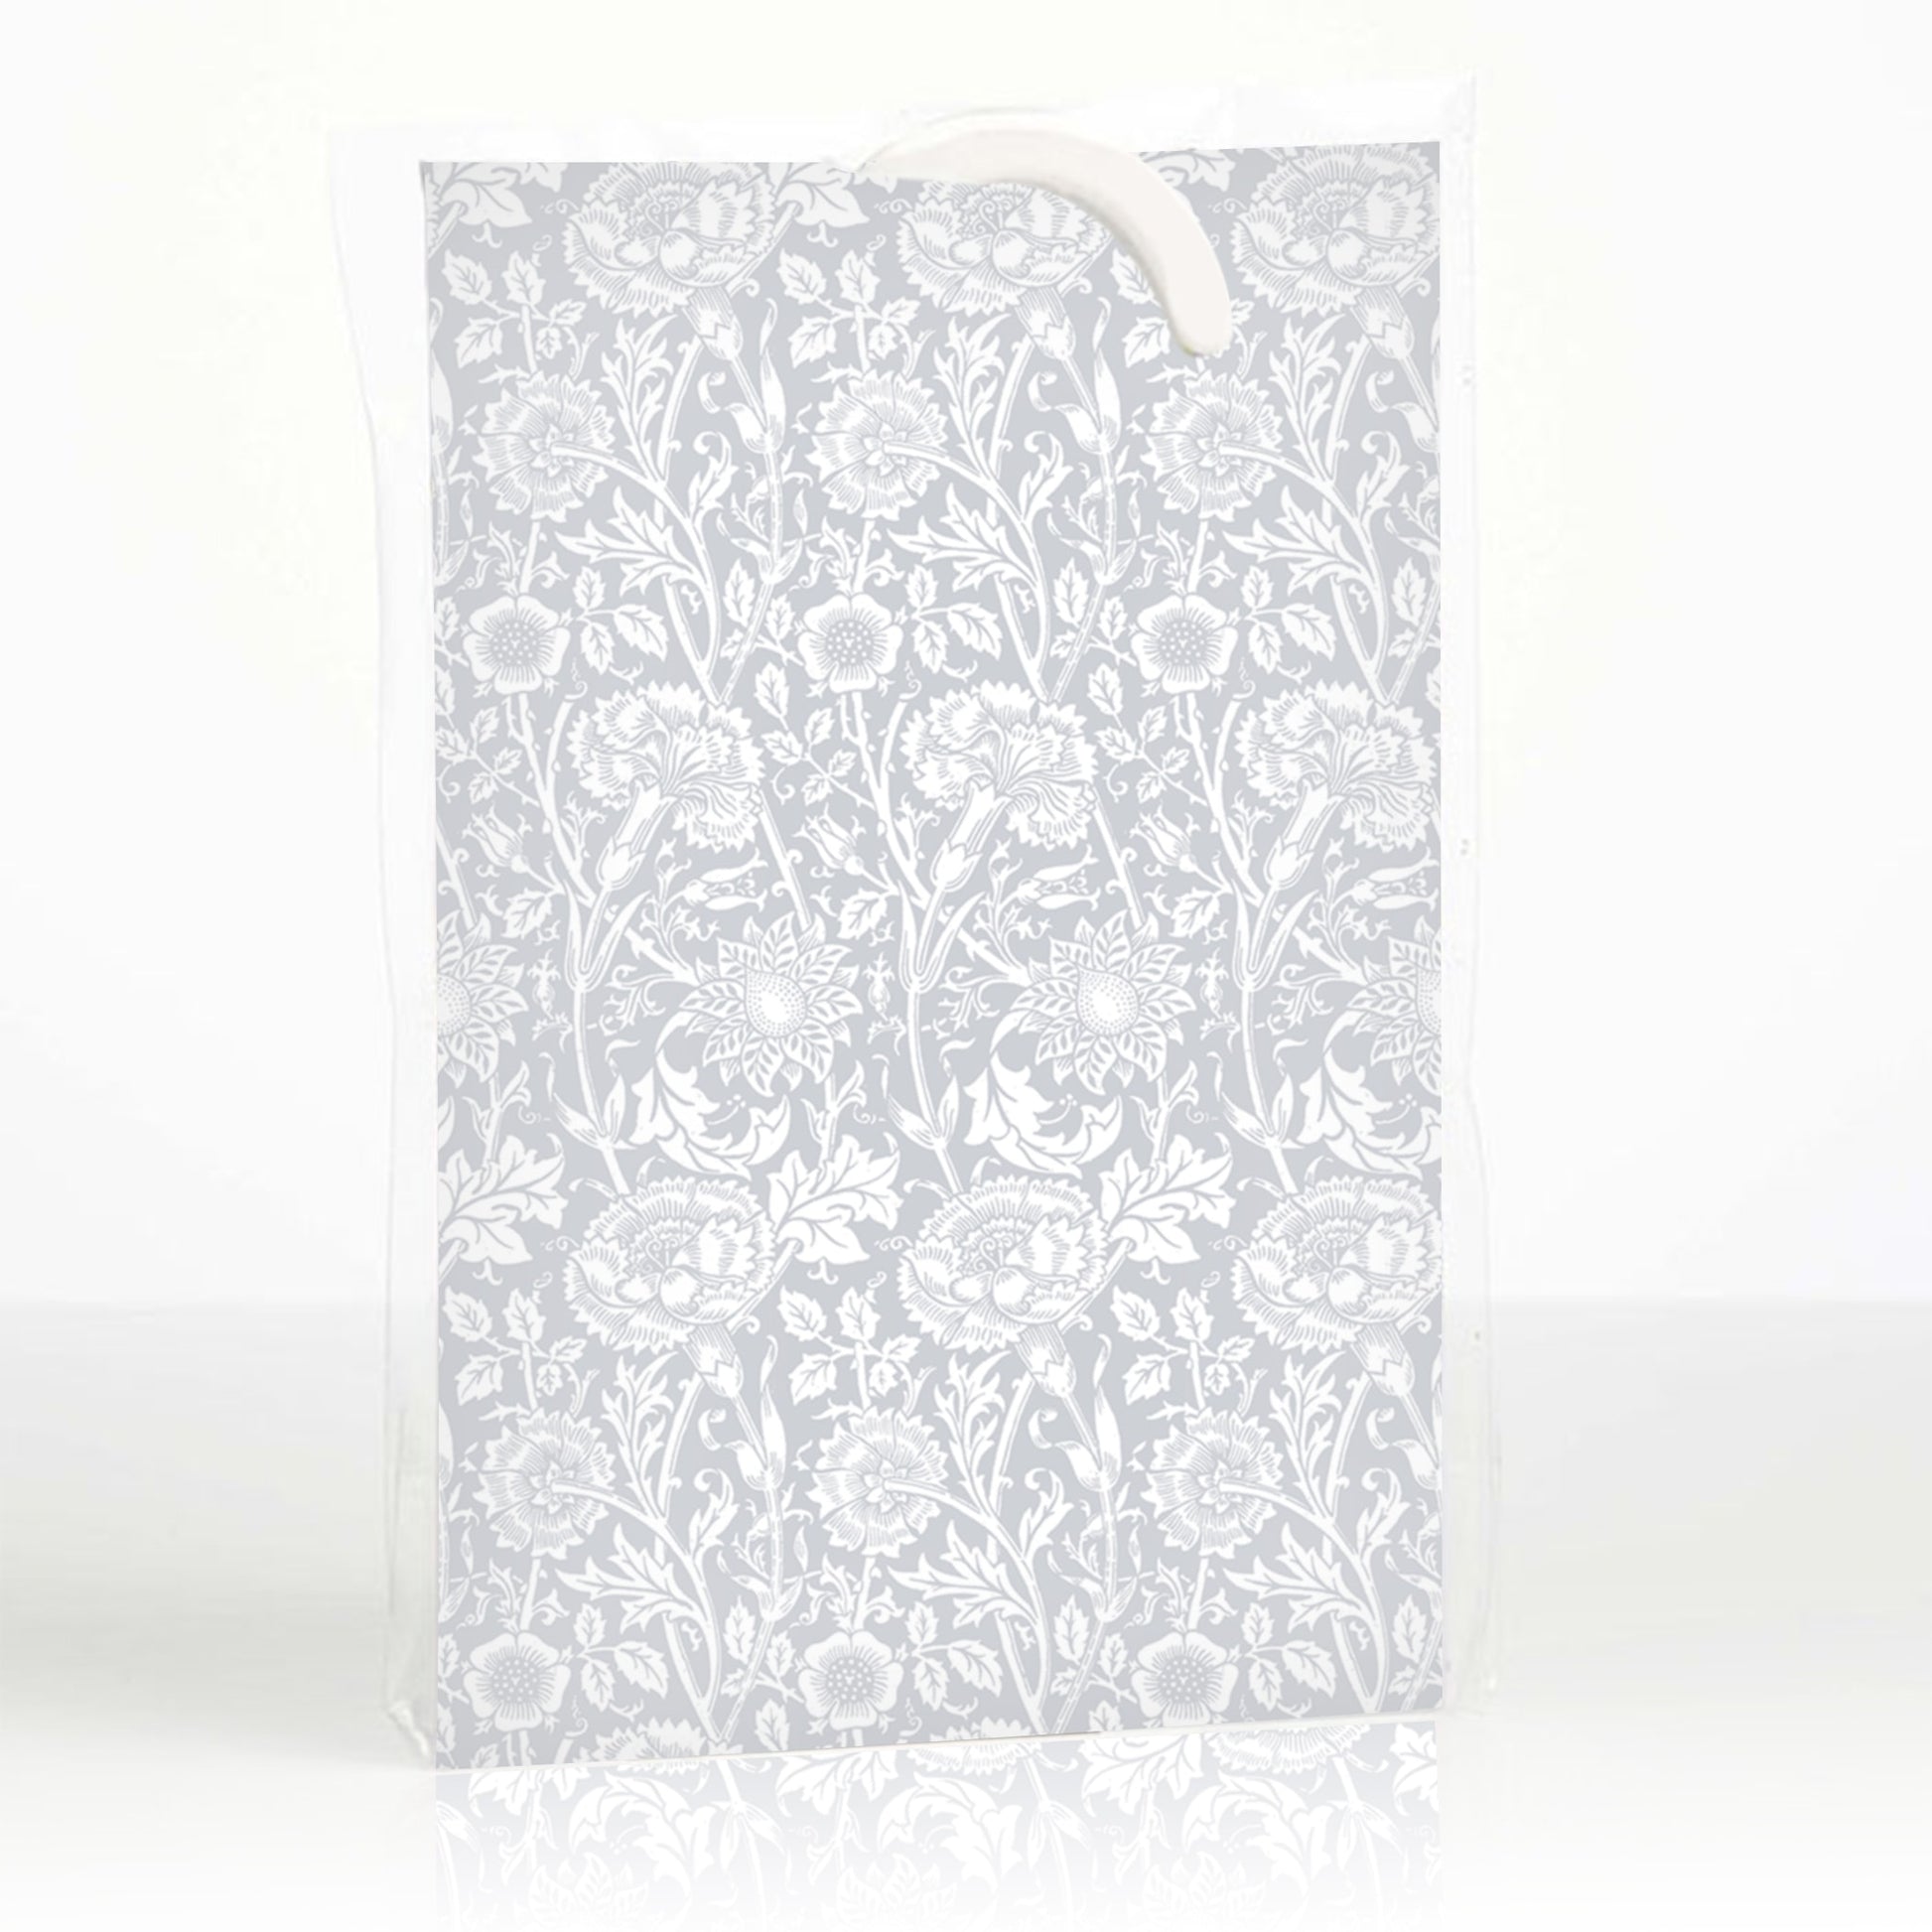 SIMPLY DRAWER LINERS | ROSE SCENTED Wardrobe Freshener in a WILLIAM MORRIS DESIGN in DUCK EGG BLUE.